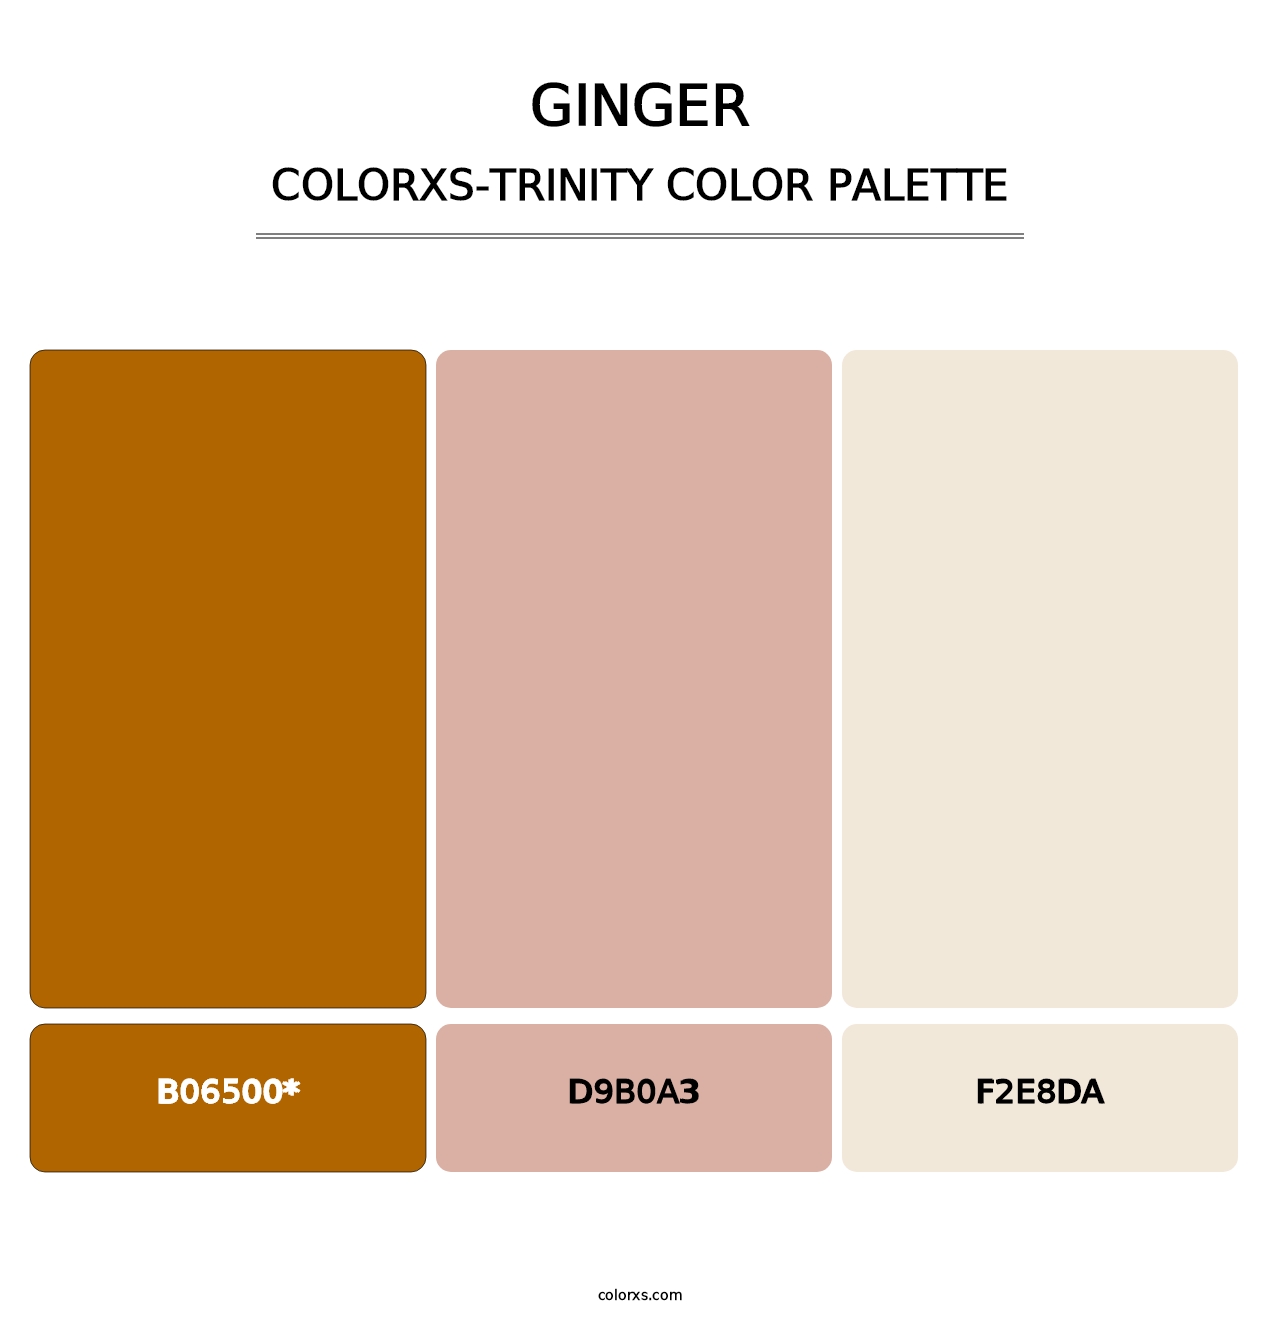 Ginger - Colorxs Trinity Palette